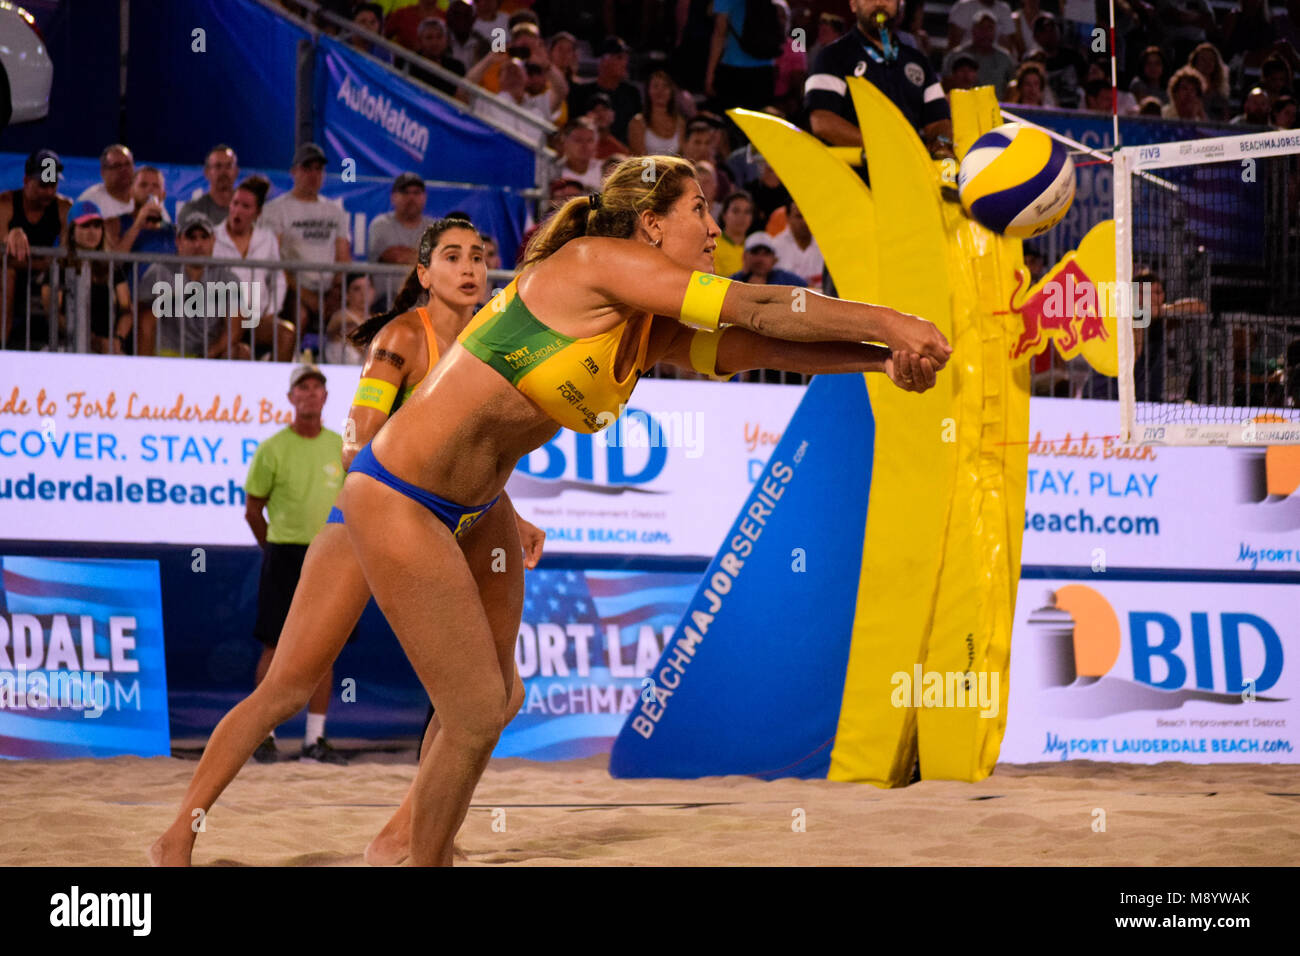 Maria Antonelli of Brazil with the volley to place the ball to his partner in the counter attack. The Volleyball Major Series 2018 Florida was hosted in Fort Lauderdale, USA from 27 February to 4 March 2018. Stock Photo